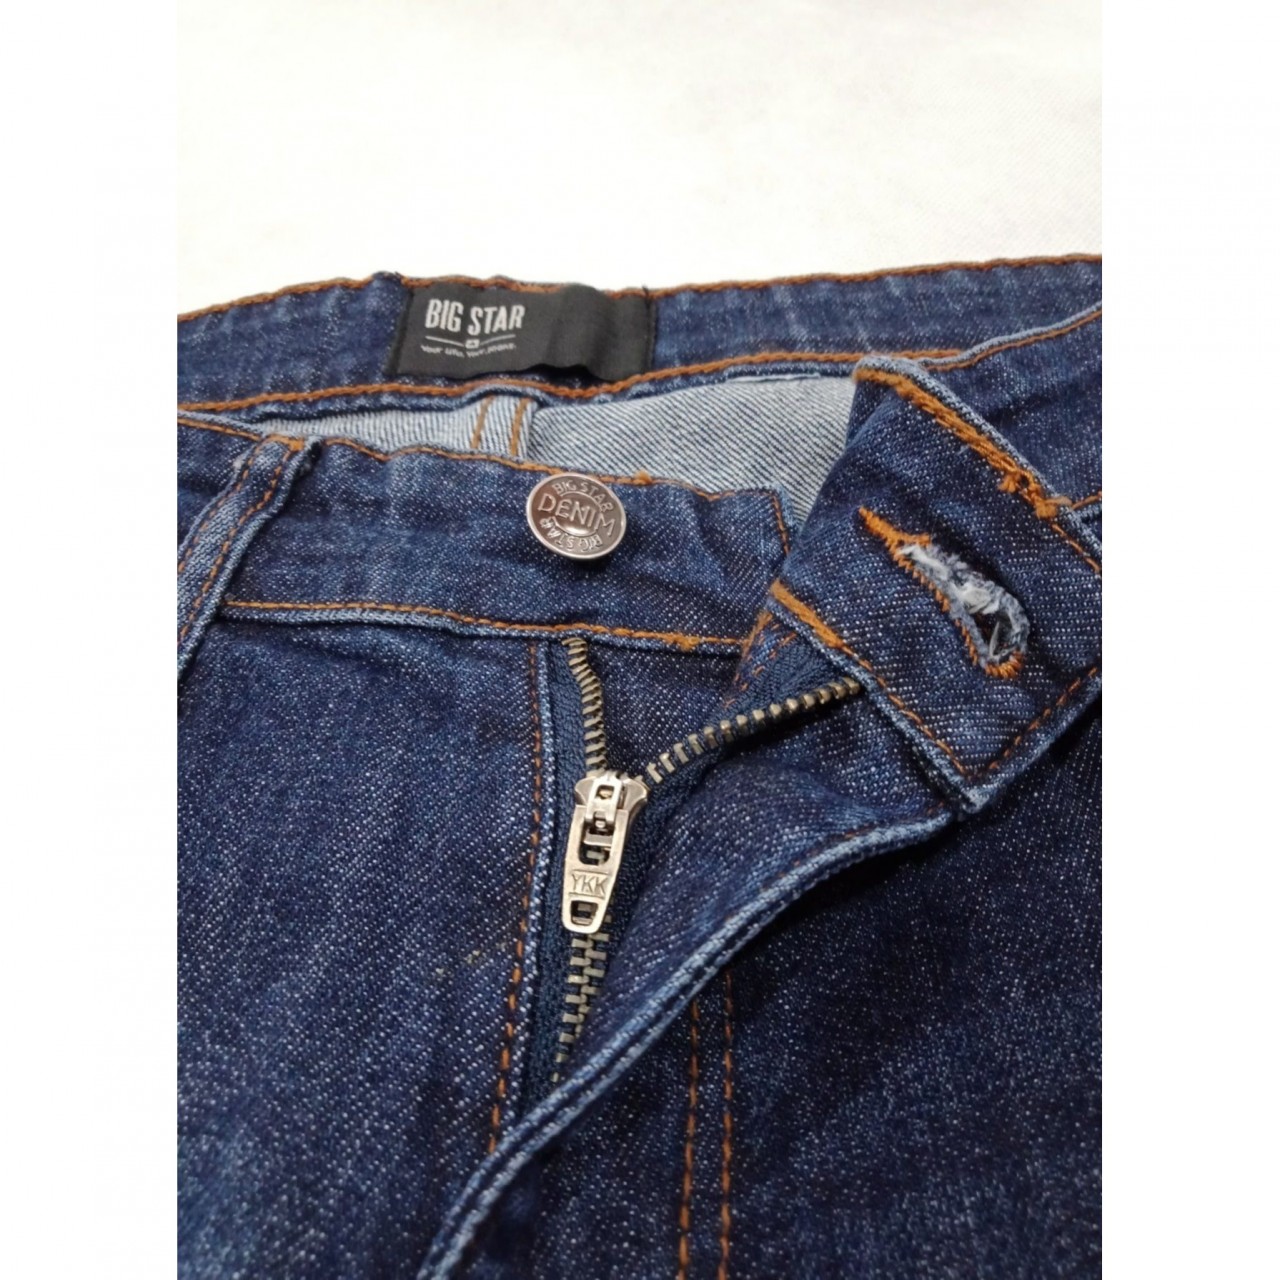 Easy Wear Denim Blue Jeans Pant - Export Quality Straight Fit